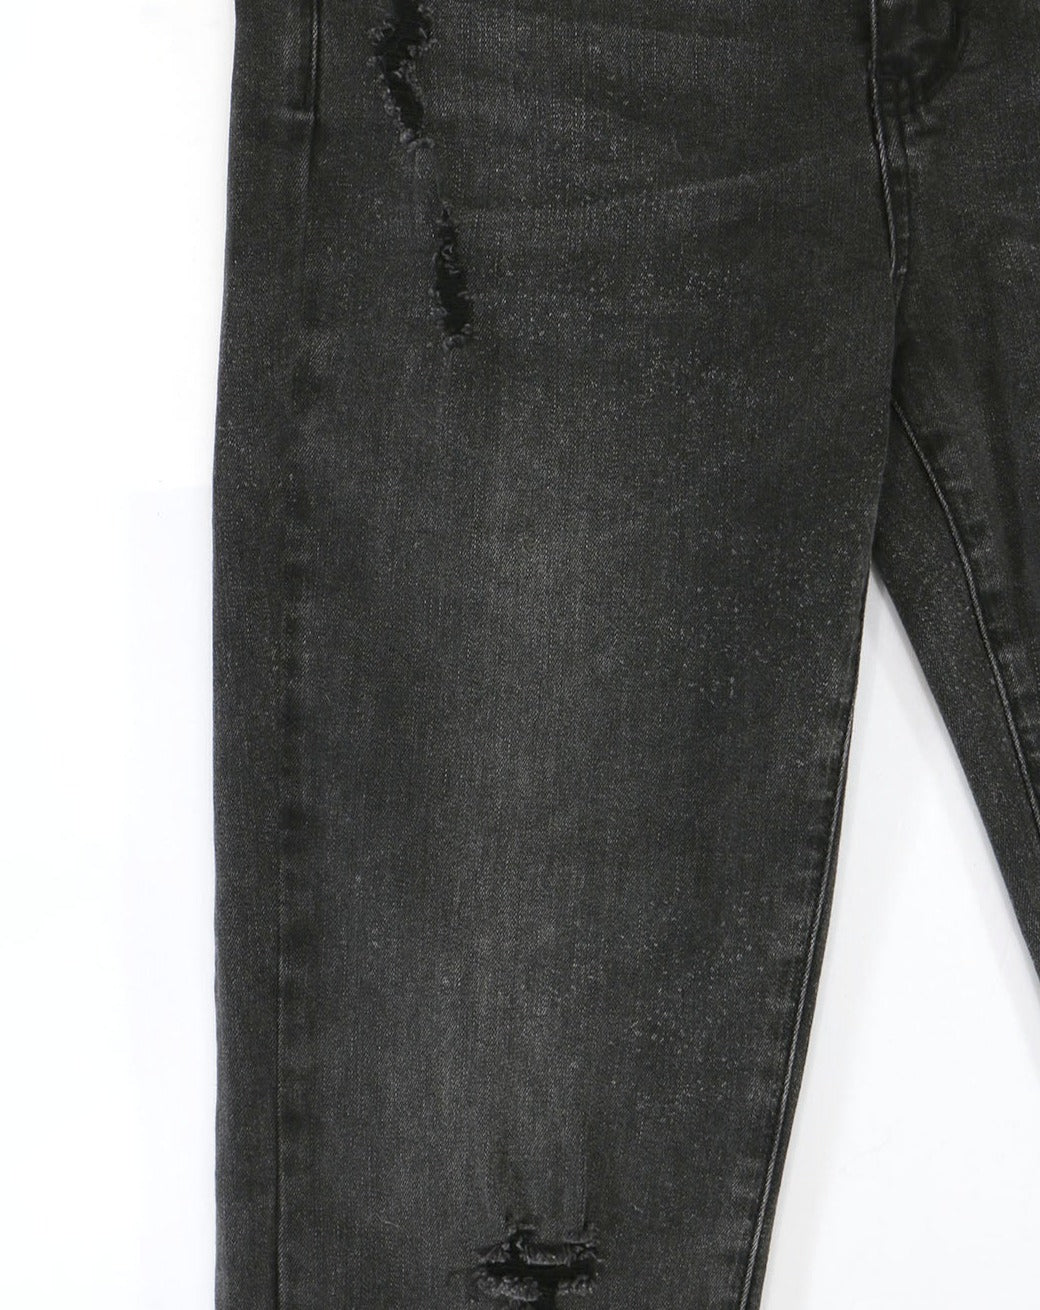 Women's Mel's Fave Distressed Straight Leg Cropped Denim in Washed Black Size 14 by Grace and Lace